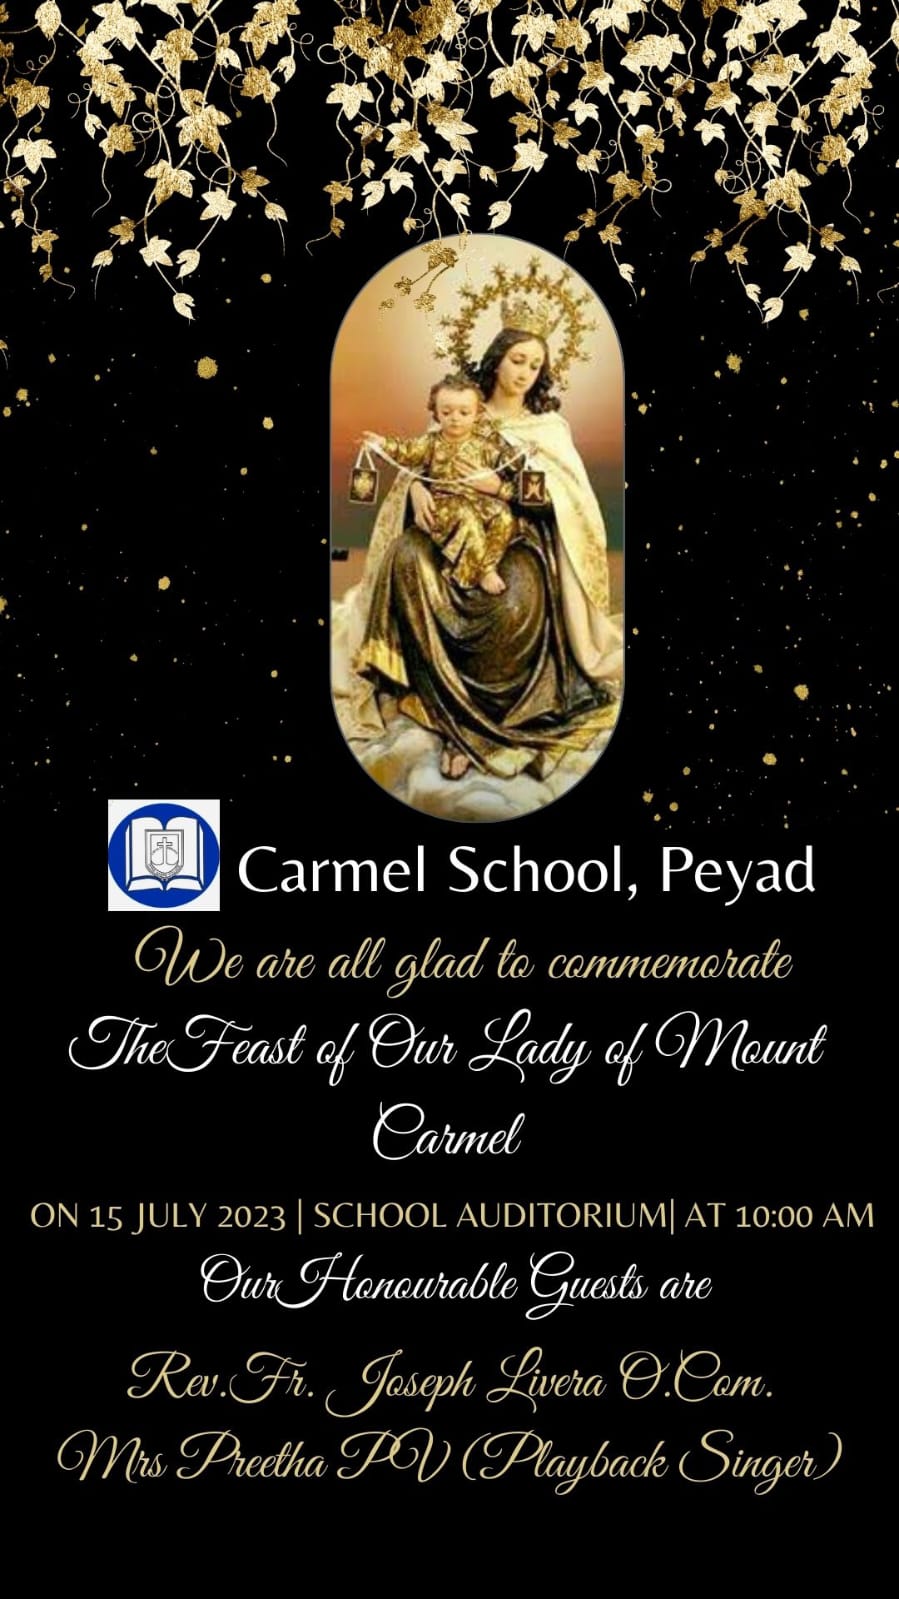 THE FEAST OF OUR LADY OF MOUNT CARMEL